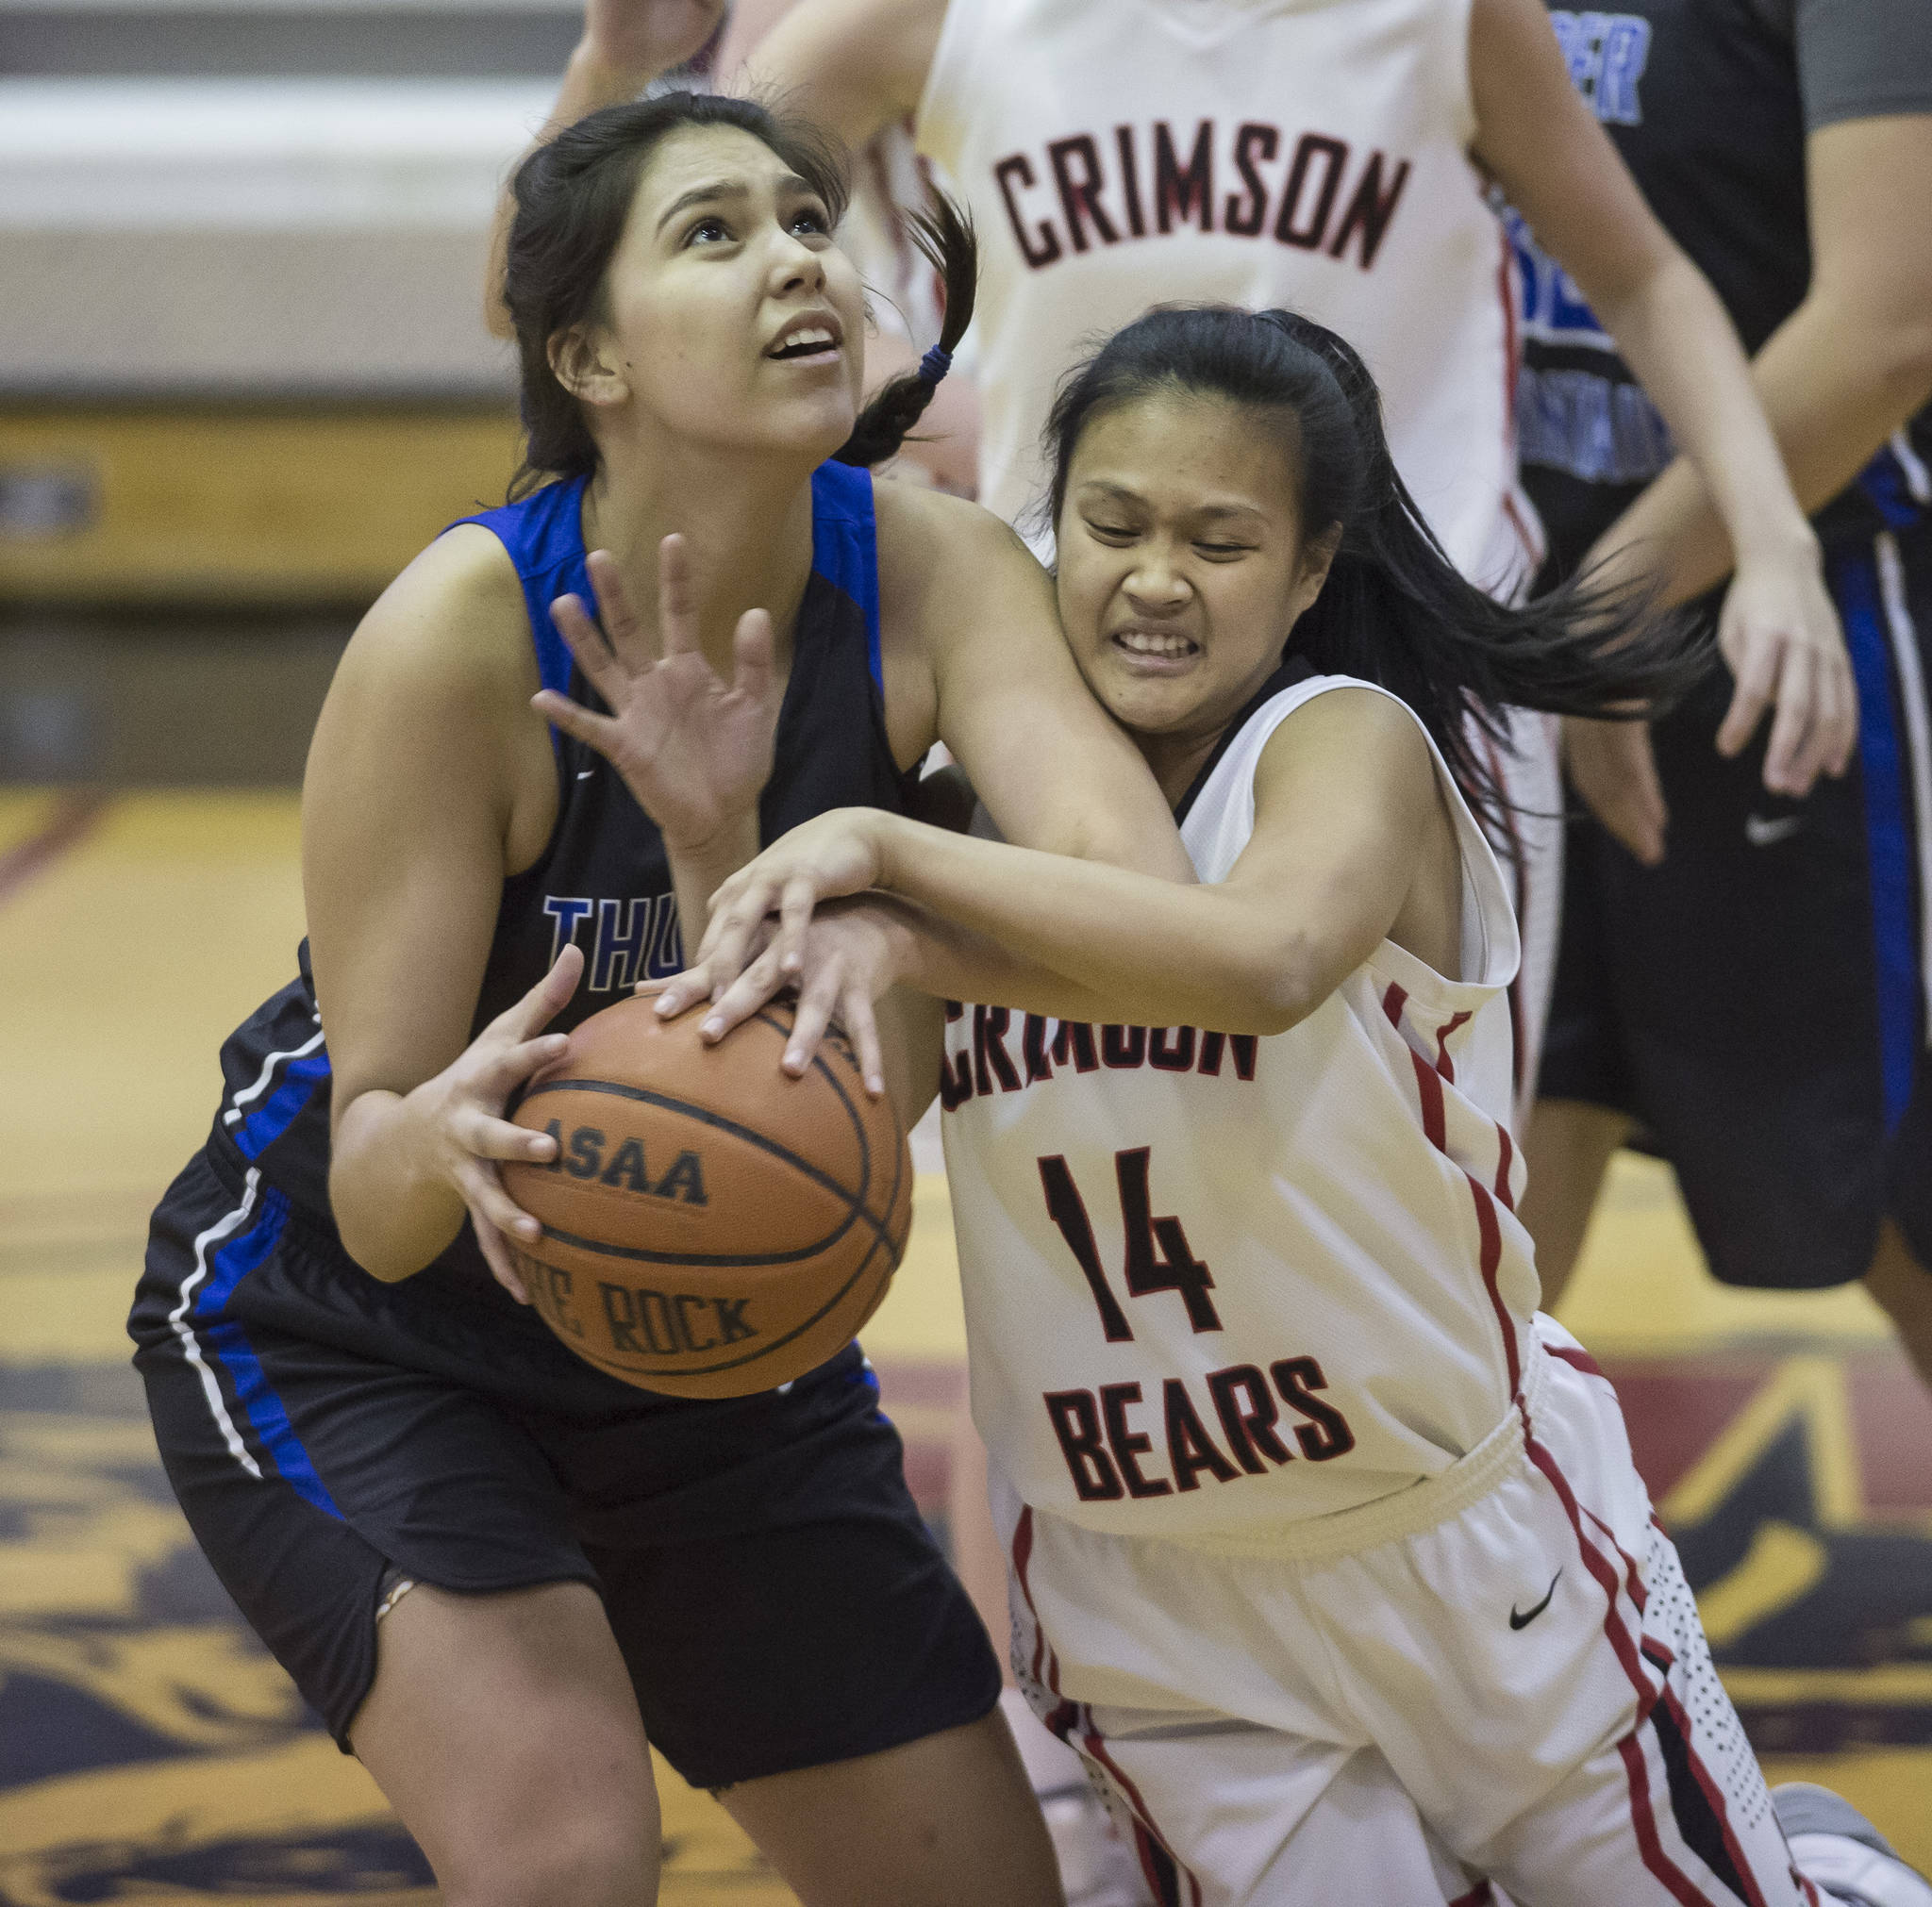 Juneau-Douglas’ Alyxn Bohulano, right, attempts to steal the ball from Thunder Mountain’s Kira Frommherz at JDHS on Friday, March 3, 2018. JDHS won 53-33. (Michael Penn | Juneau Empire)